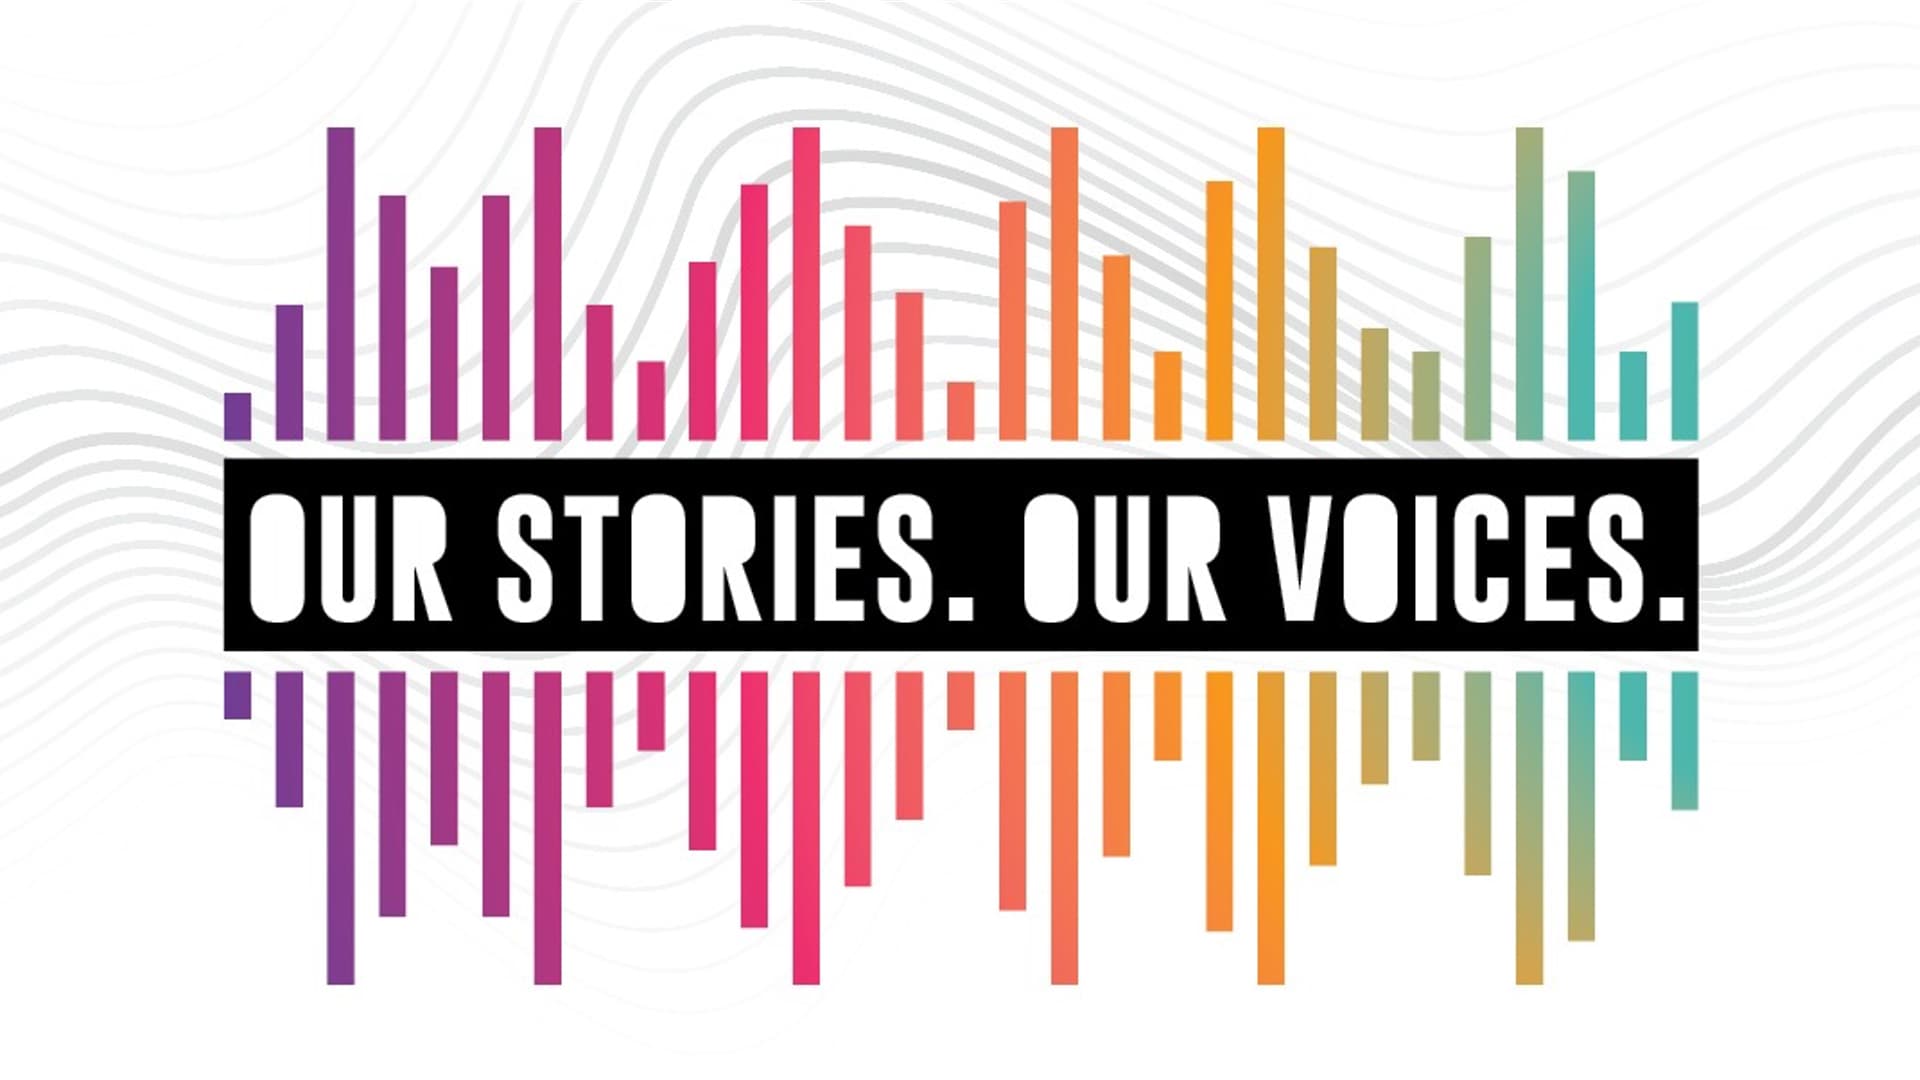 Our Stories Our Voices graphic with colored equalizer bands and sound waves